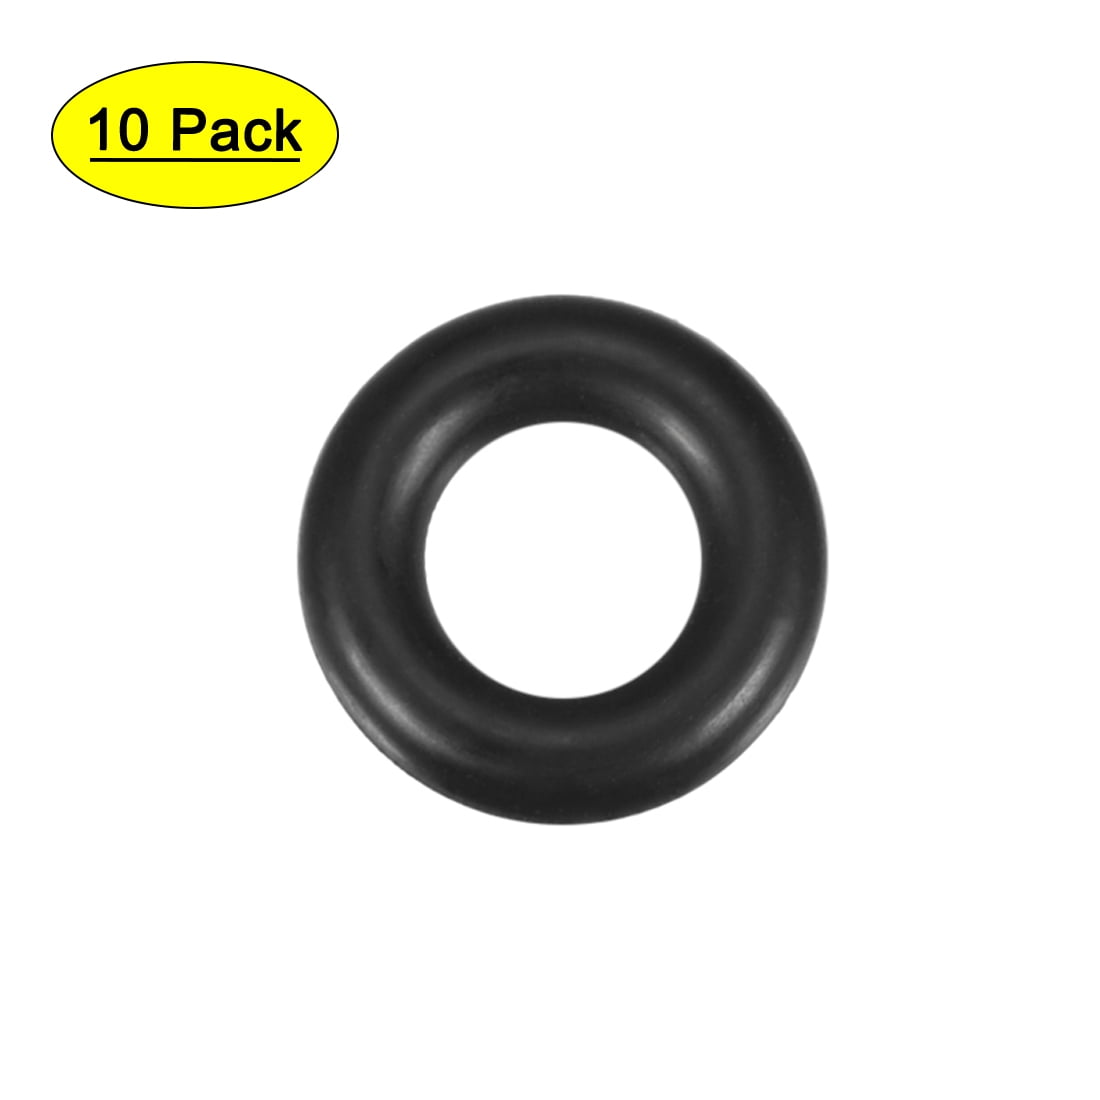 Black Rubber O Ring Manufacturer,Black Rubber O Ring Exporter From  Haryana,India